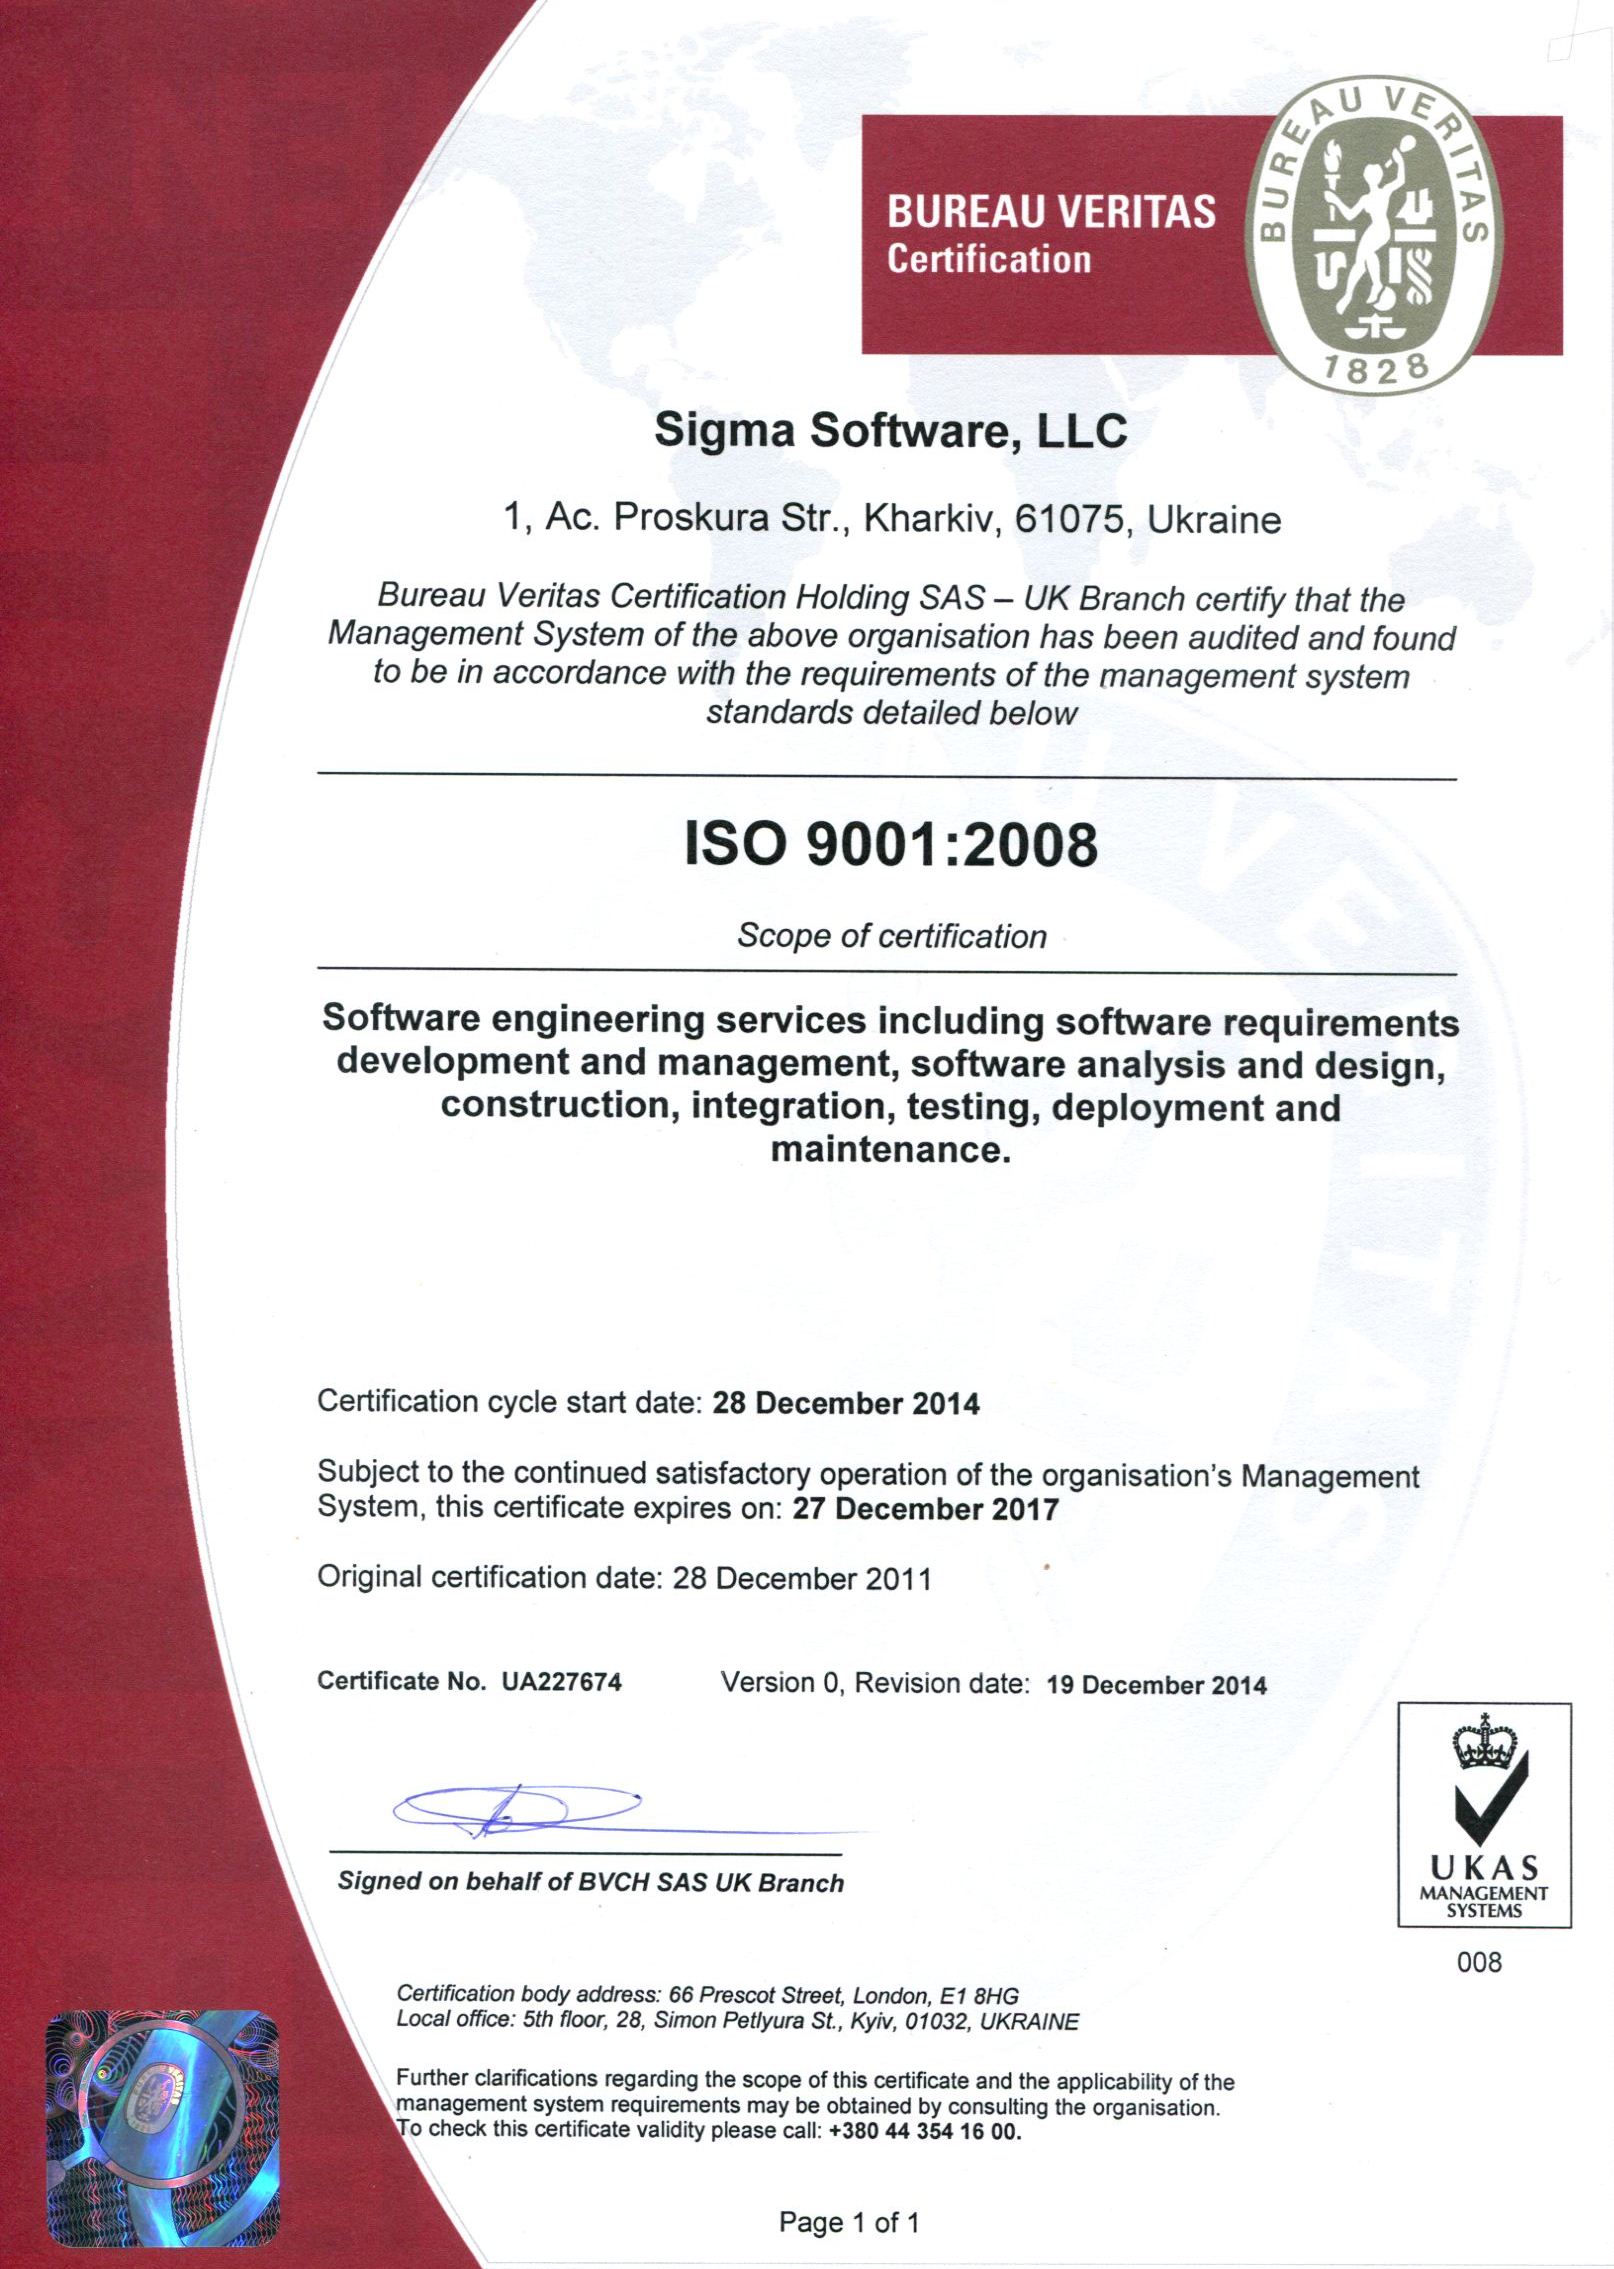 ISO:9001 certificate